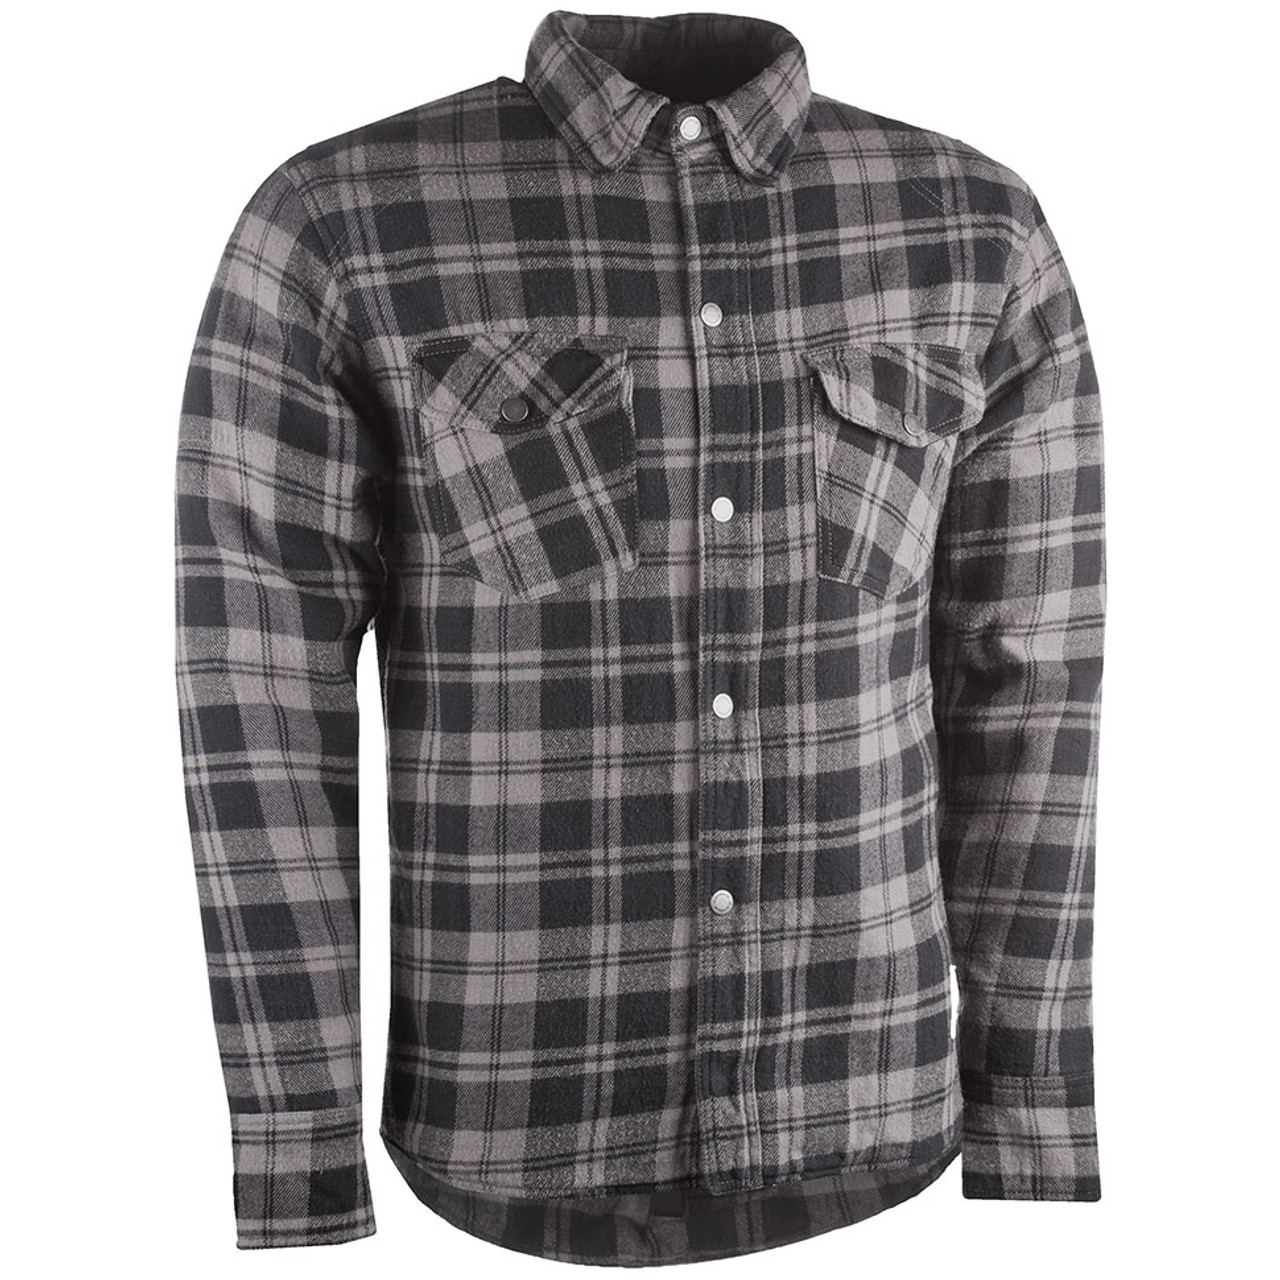 Highway 21 Marksman Flannel Shirt - Black/Gray - Get Lowered Cycles